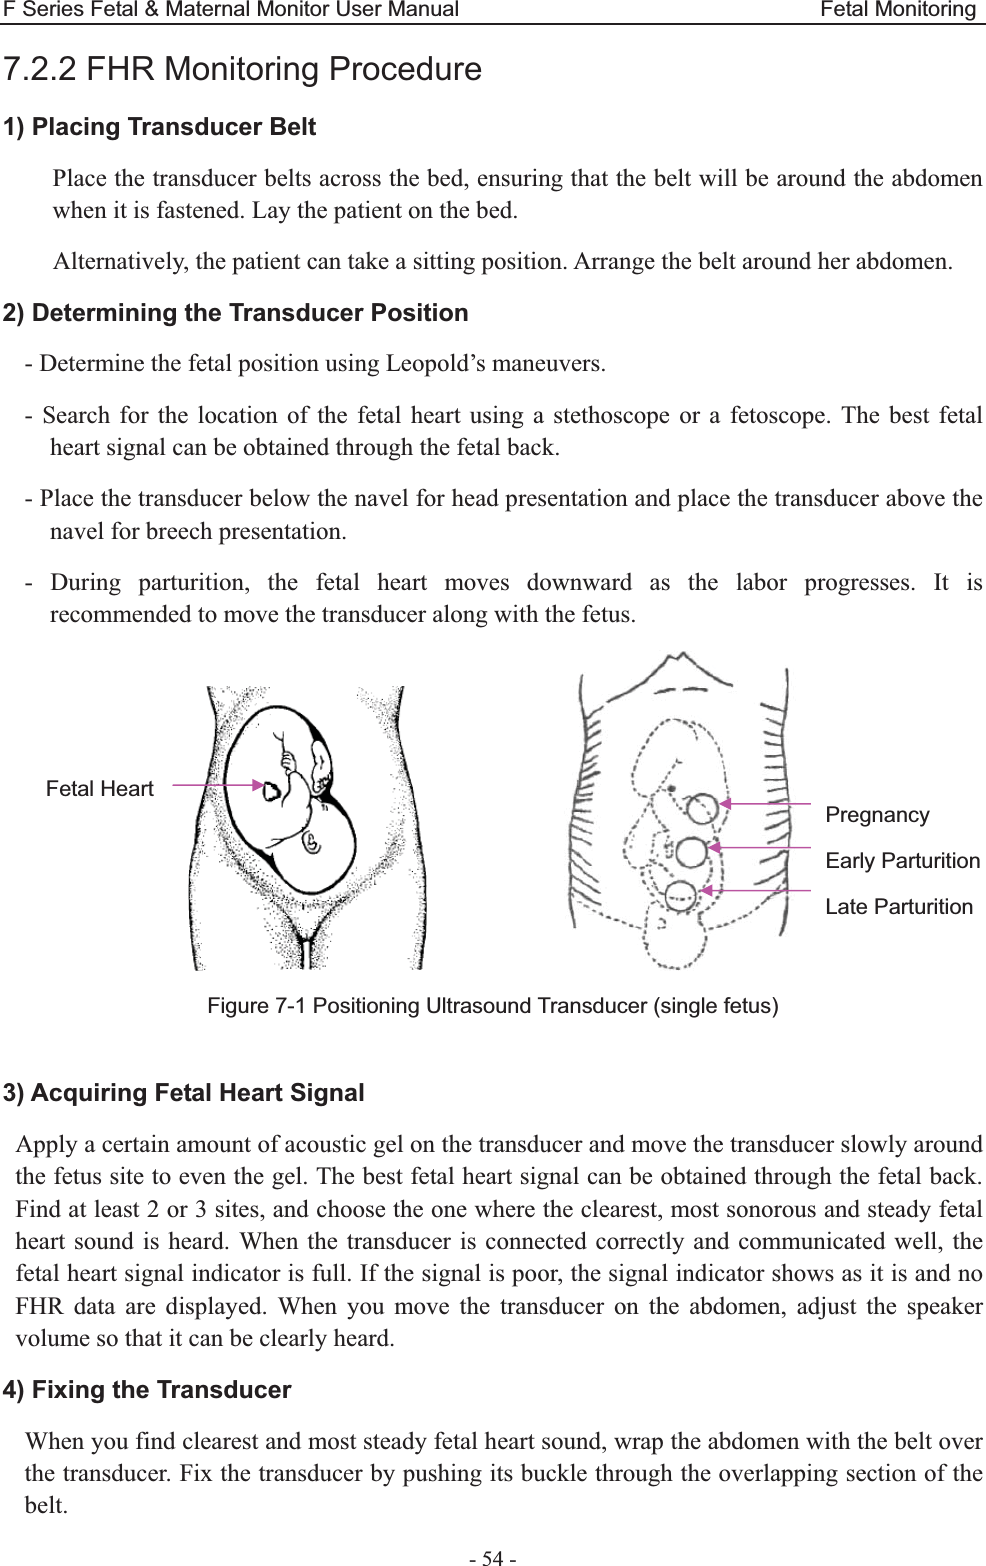 F Series Fetal &amp; Maternal Monitor User Manual                                 Fetal Monitoring - 54 - 7.2.2 FHR Monitoring Procedure 1) Placing Transducer Belt Place the transducer belts across the bed, ensuring that the belt will be around the abdomen when it is fastened. Lay the patient on the bed. Alternatively, the patient can take a sitting position. Arrange the belt around her abdomen. 2) Determining the Transducer Position - Determine the fetal position using Leopold’s maneuvers. - Search for the location of the fetal heart using a stethoscope or a fetoscope. The best fetal heart signal can be obtained through the fetal back. - Place the transducer below the navel for head presentation and place the transducer above the navel for breech presentation. - During parturition, the fetal heart moves downward as the labor progresses. It is recommended to move the transducer along with the fetus.              Figure 7-1 Positioning Ultrasound Transducer (single fetus)  3) Acquiring Fetal Heart Signal Apply a certain amount of acoustic gel on the transducer and move the transducer slowly around the fetus site to even the gel. The best fetal heart signal can be obtained through the fetal back. Find at least 2 or 3 sites, and choose the one where the clearest, most sonorous and steady fetal heart sound is heard. When the transducer is connected correctly and communicated well, the fetal heart signal indicator is full. If the signal is poor, the signal indicator shows as it is and no FHR data are displayed. When you move the transducer on the abdomen, adjust the speaker volume so that it can be clearly heard. 4) Fixing the Transducer When you find clearest and most steady fetal heart sound, wrap the abdomen with the belt over the transducer. Fix the transducer by pushing its buckle through the overlapping section of the belt. Fetal Heart Pregnancy Early Parturition Late Parturition 